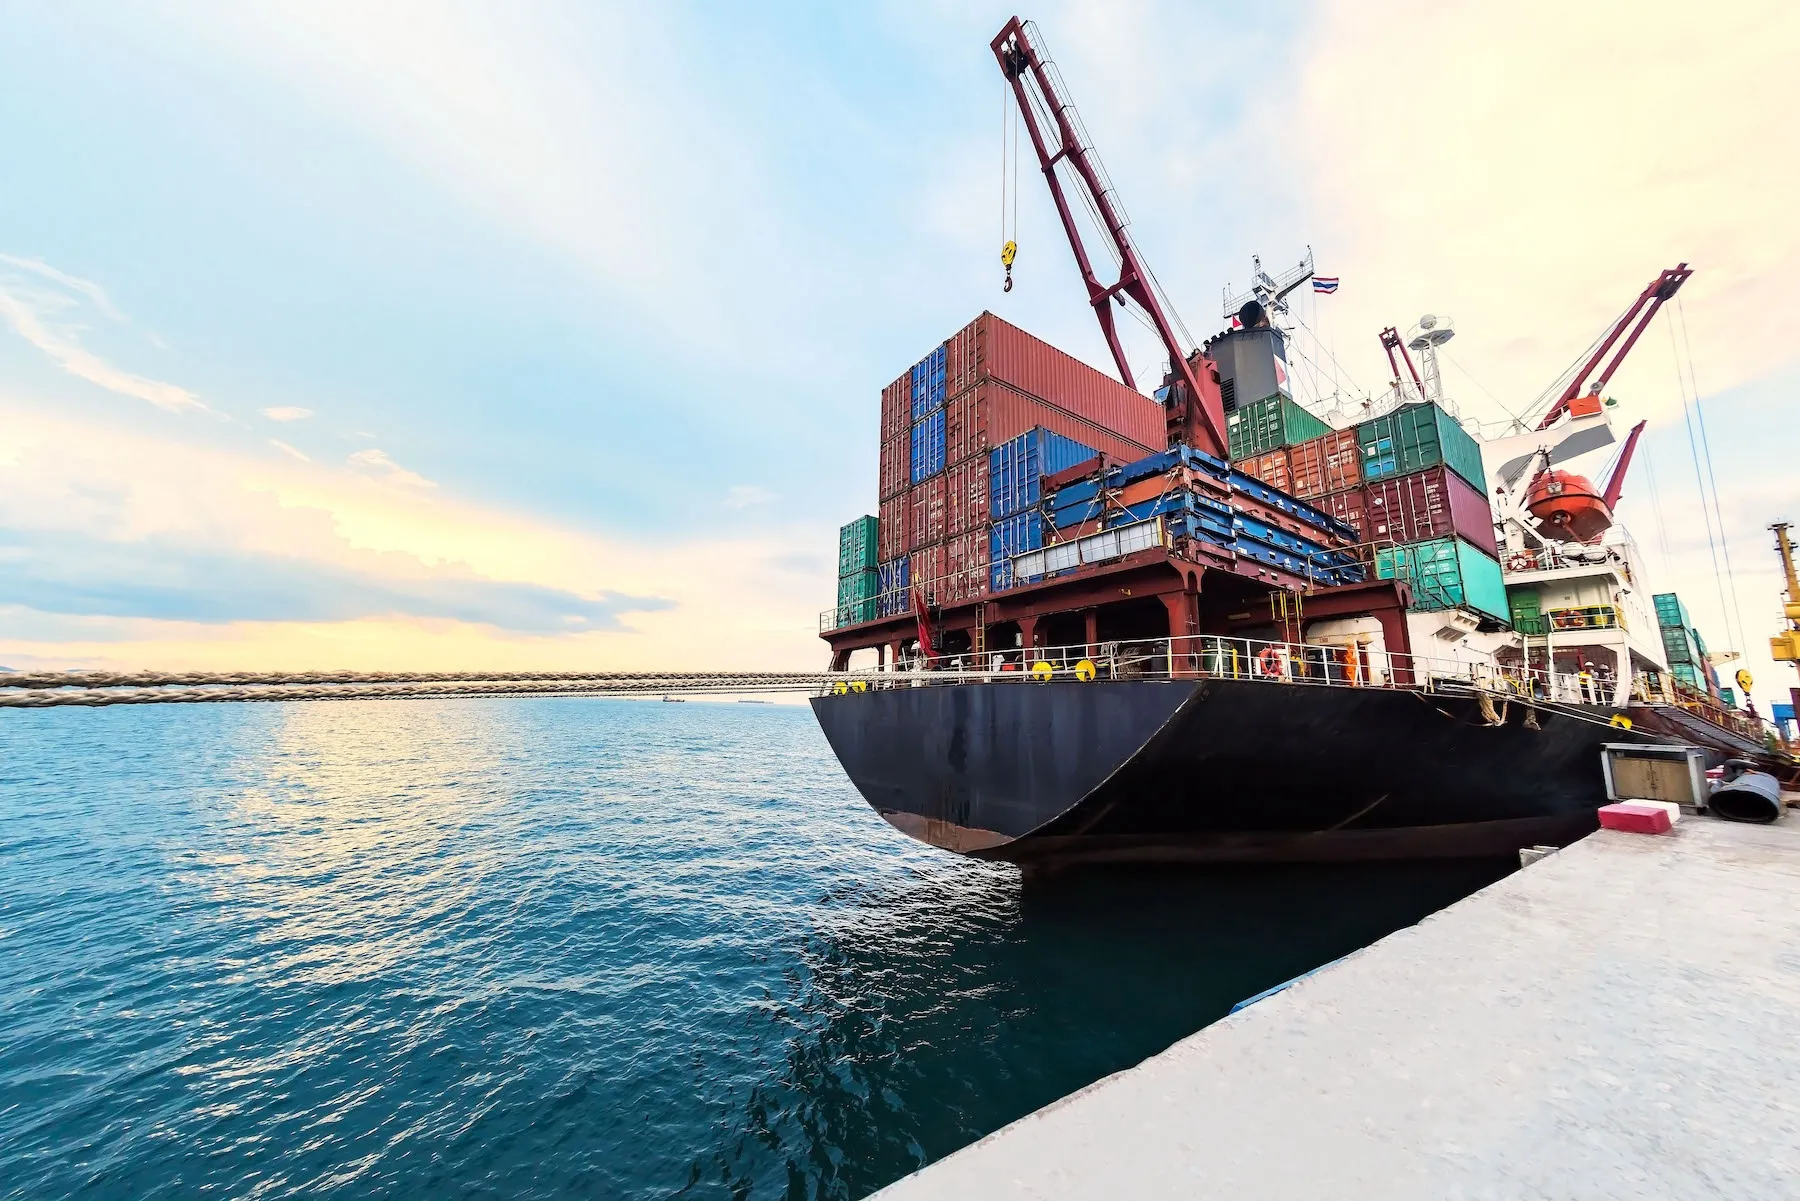  Demurrage Charges - Lease or penalty clause?